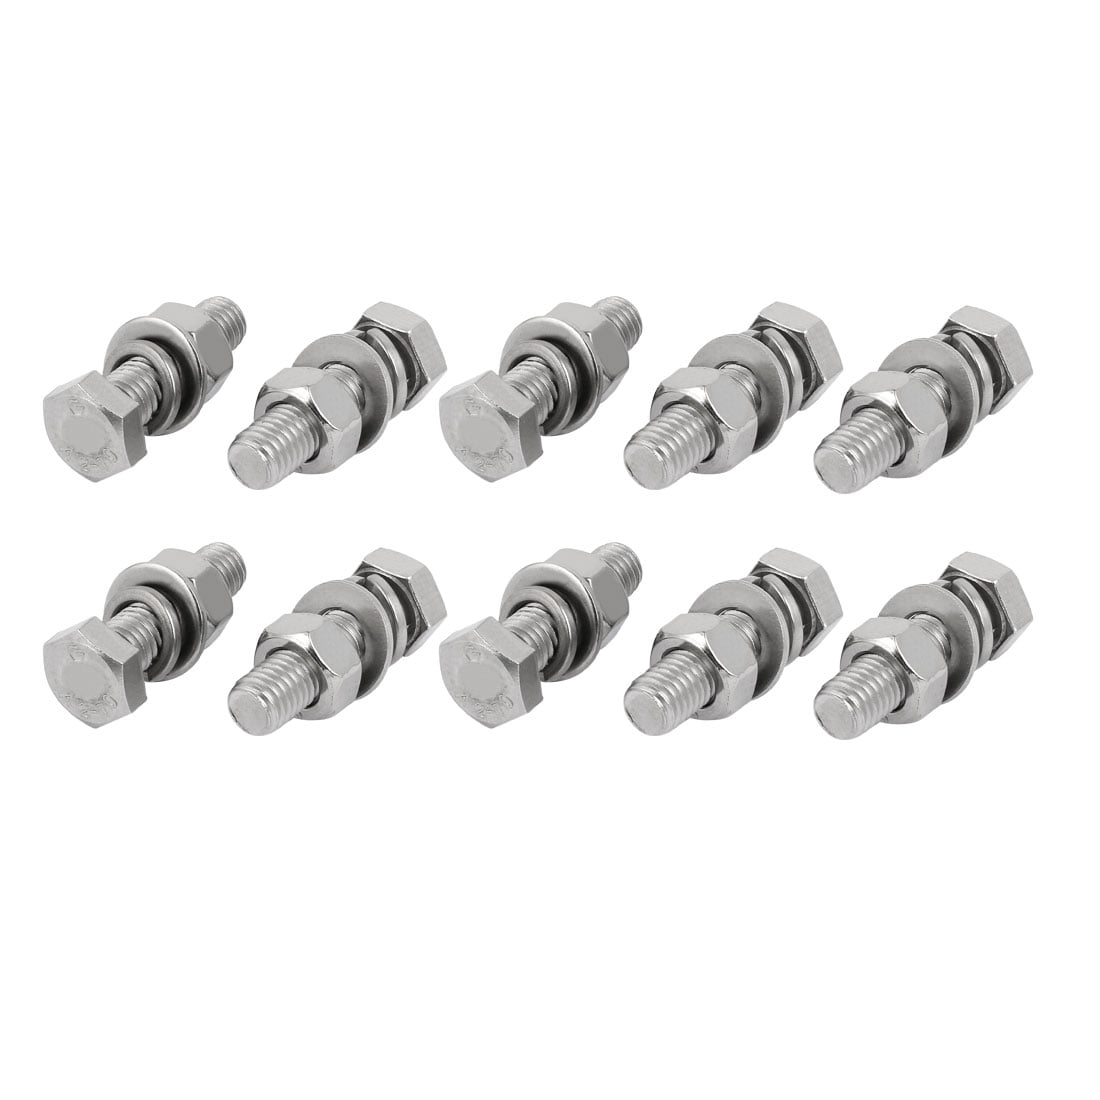 10 Sets M10 x 40mm Stainless Steel Hex Bolts with Nuts and Washers Heavy Duty 